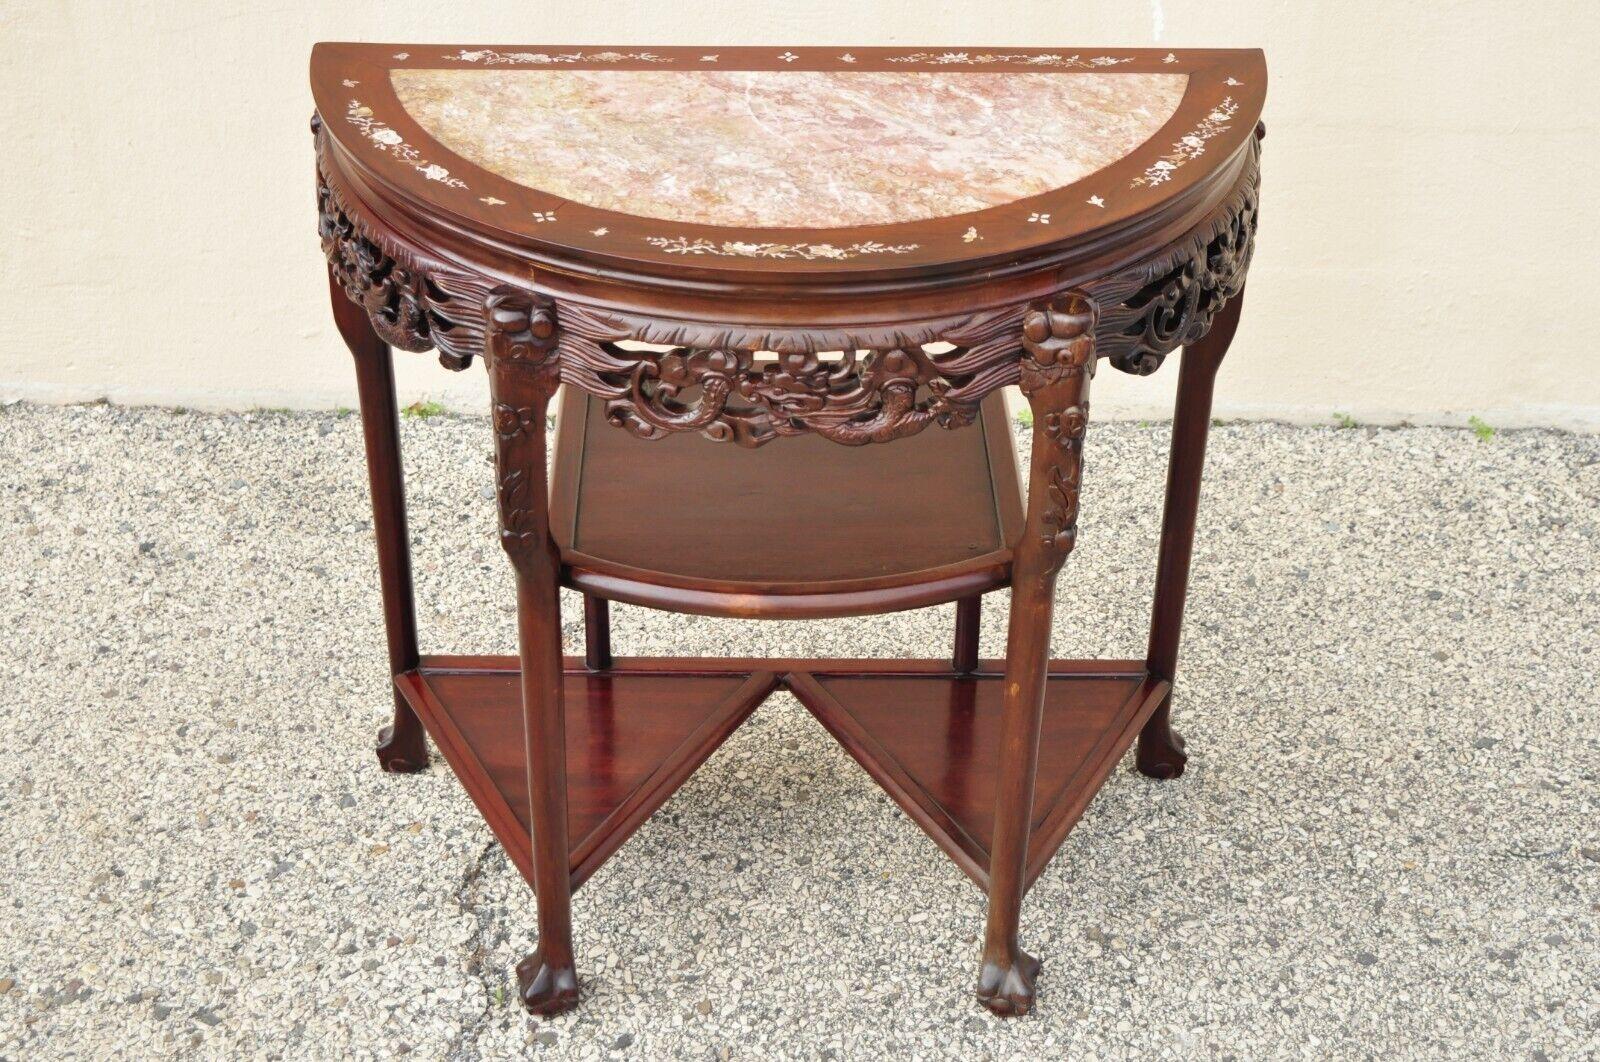 Vintage Oriental Chinese carved hardwood demilune marble top console table. Item features a half round demilune top with inset pink marble, mother of pearl flower inlay, carved ball and claw feet, multiple tiers, great style and form. Circa mid to